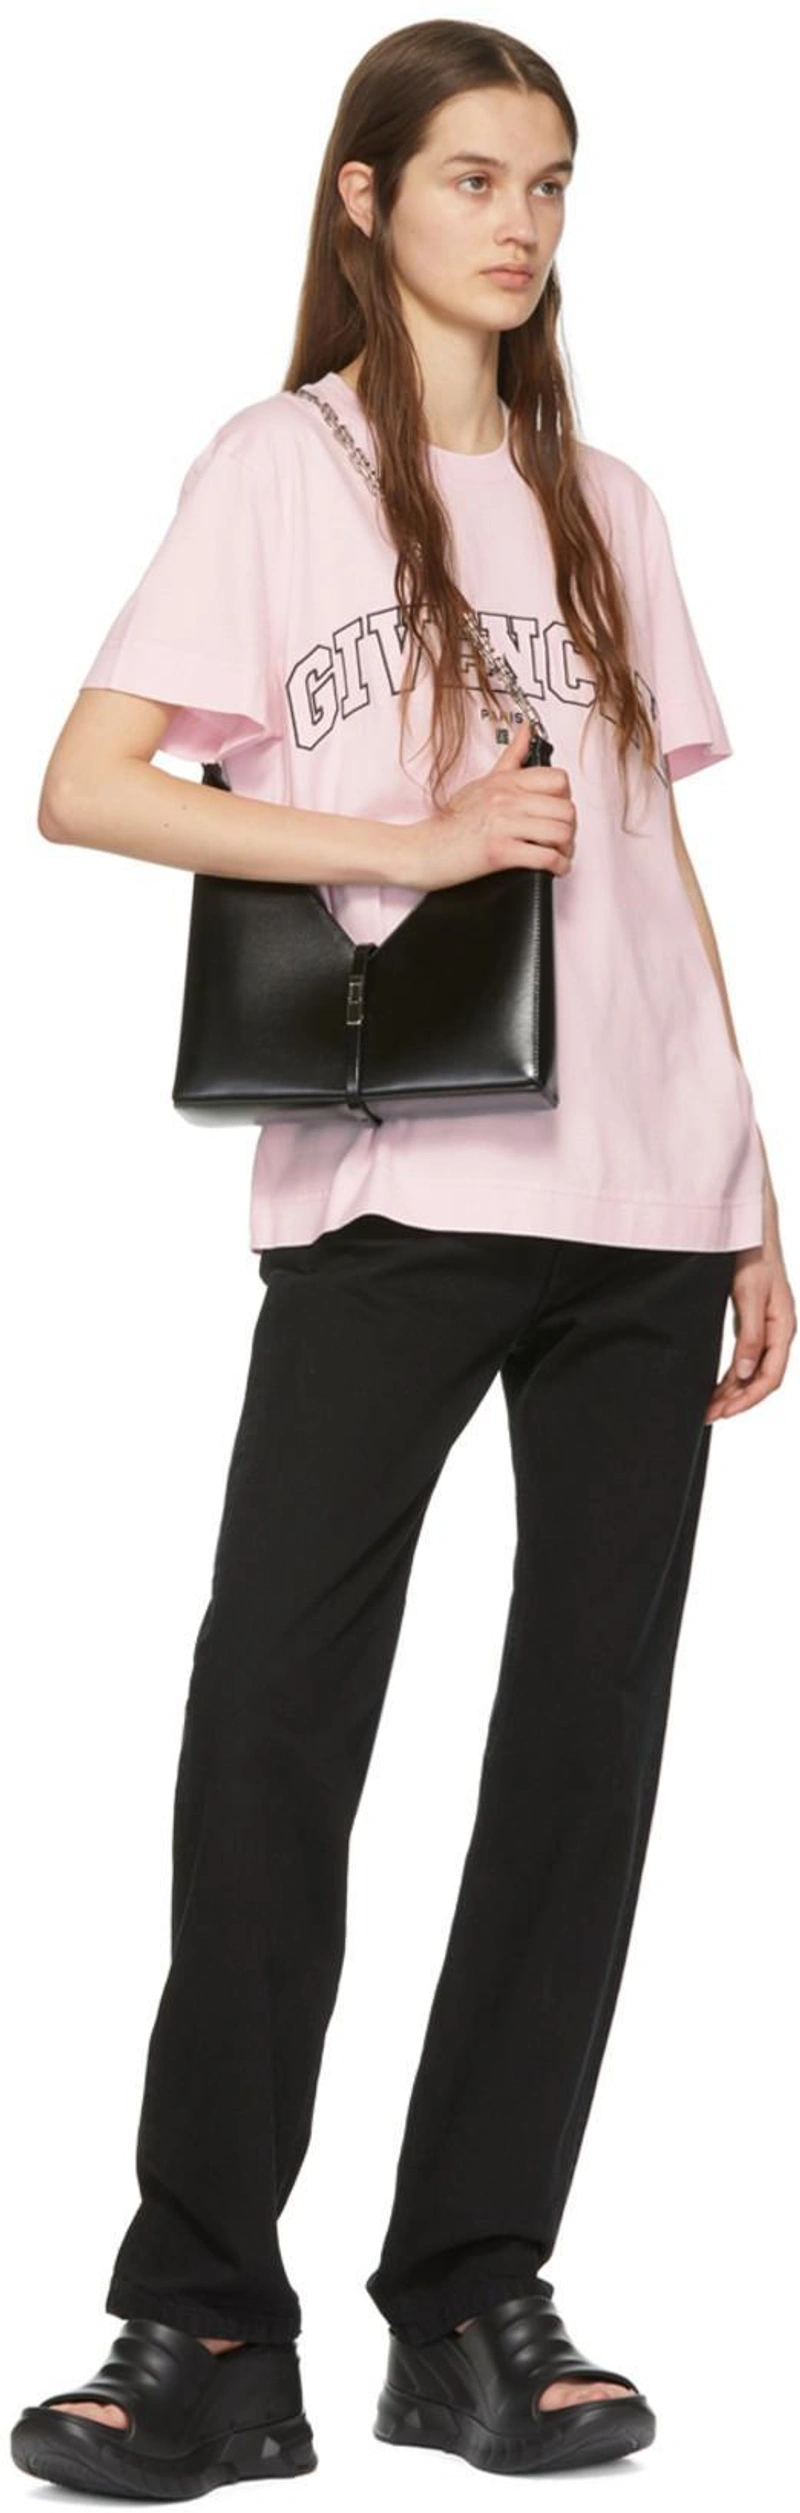 SSENSE's Post | 搭配: Balenciaga Black Normal Fit Jeans In 1105 Pitch Black；Givenchy Pink Cotton T-shirt In 681 Light Pink